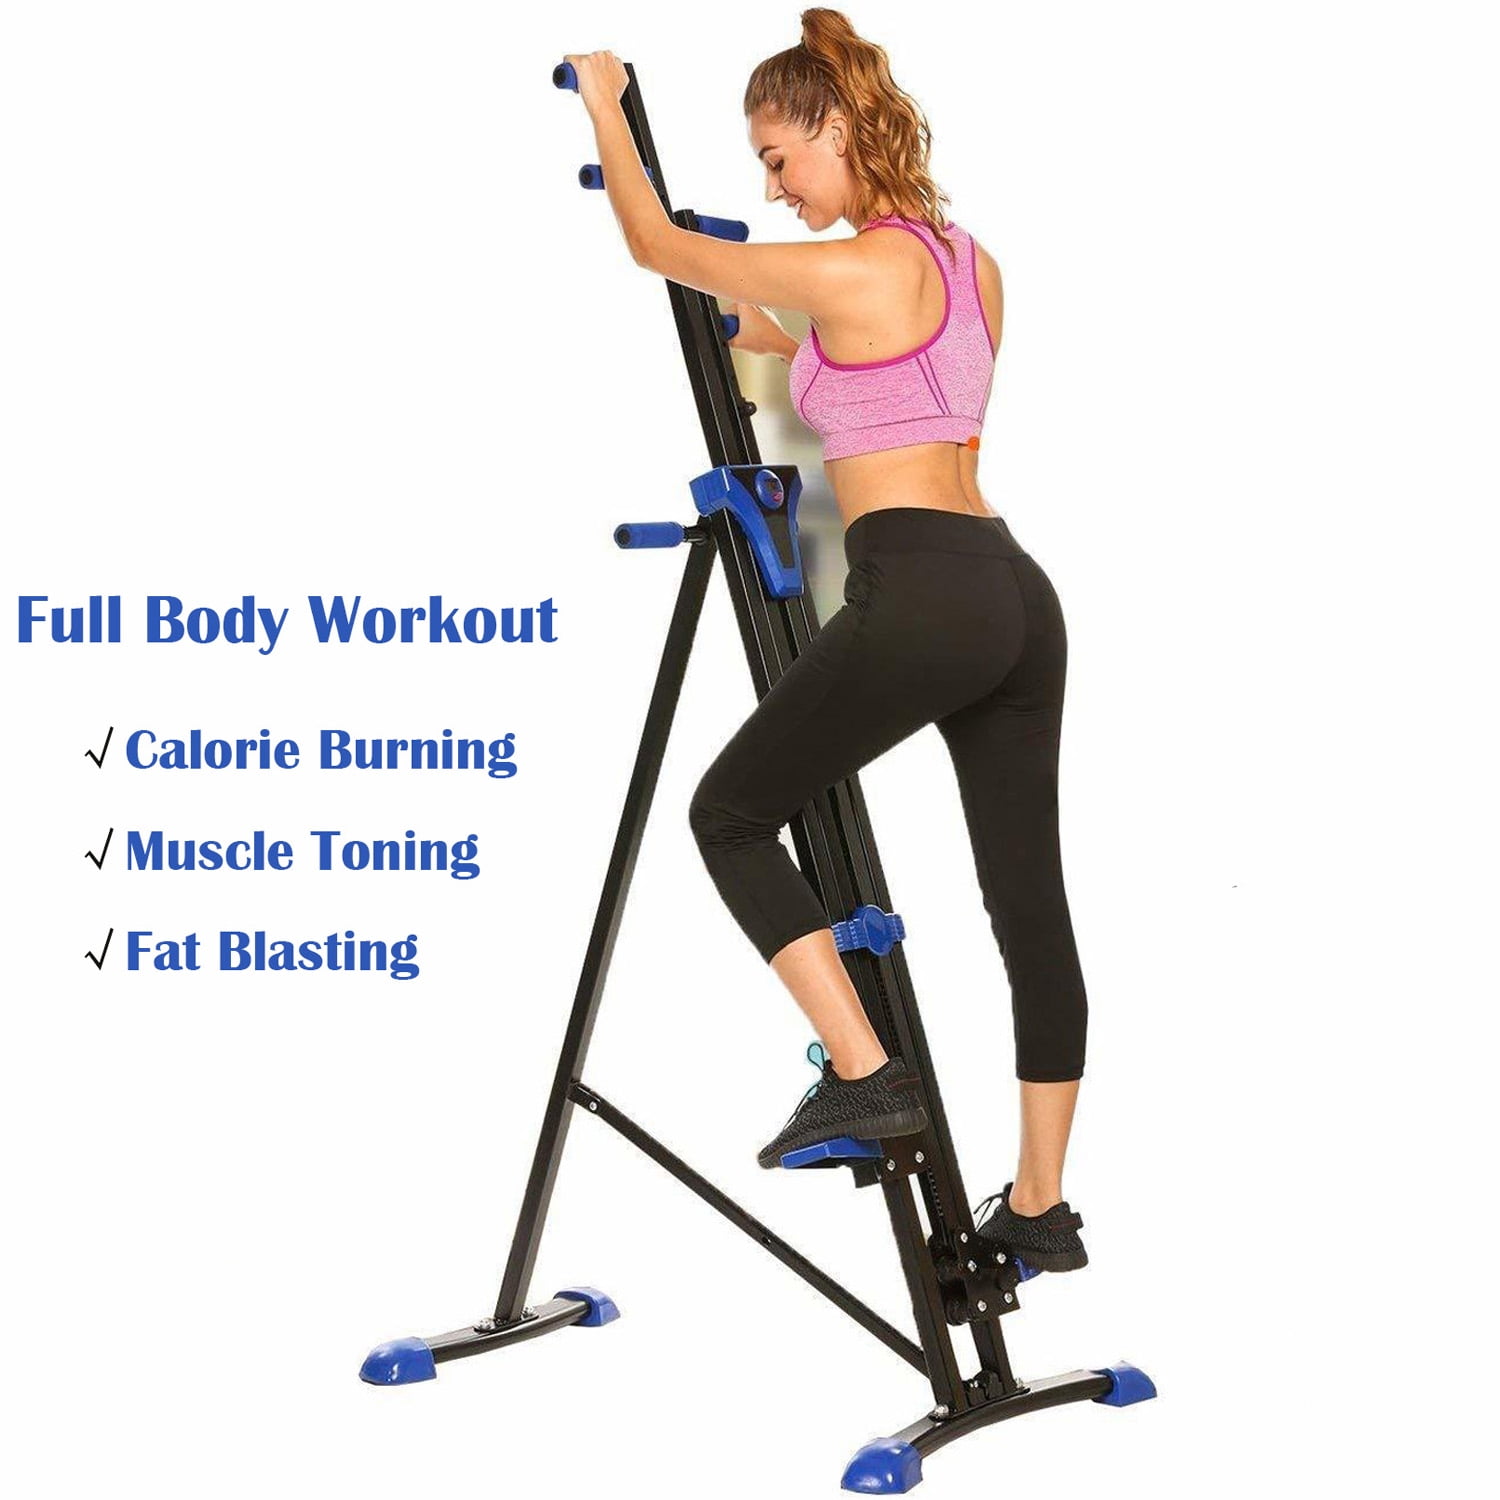 Details about   LCD Vertical Climber Folding 2-in-1 Body Exercise Fitness Cardio Machine New 